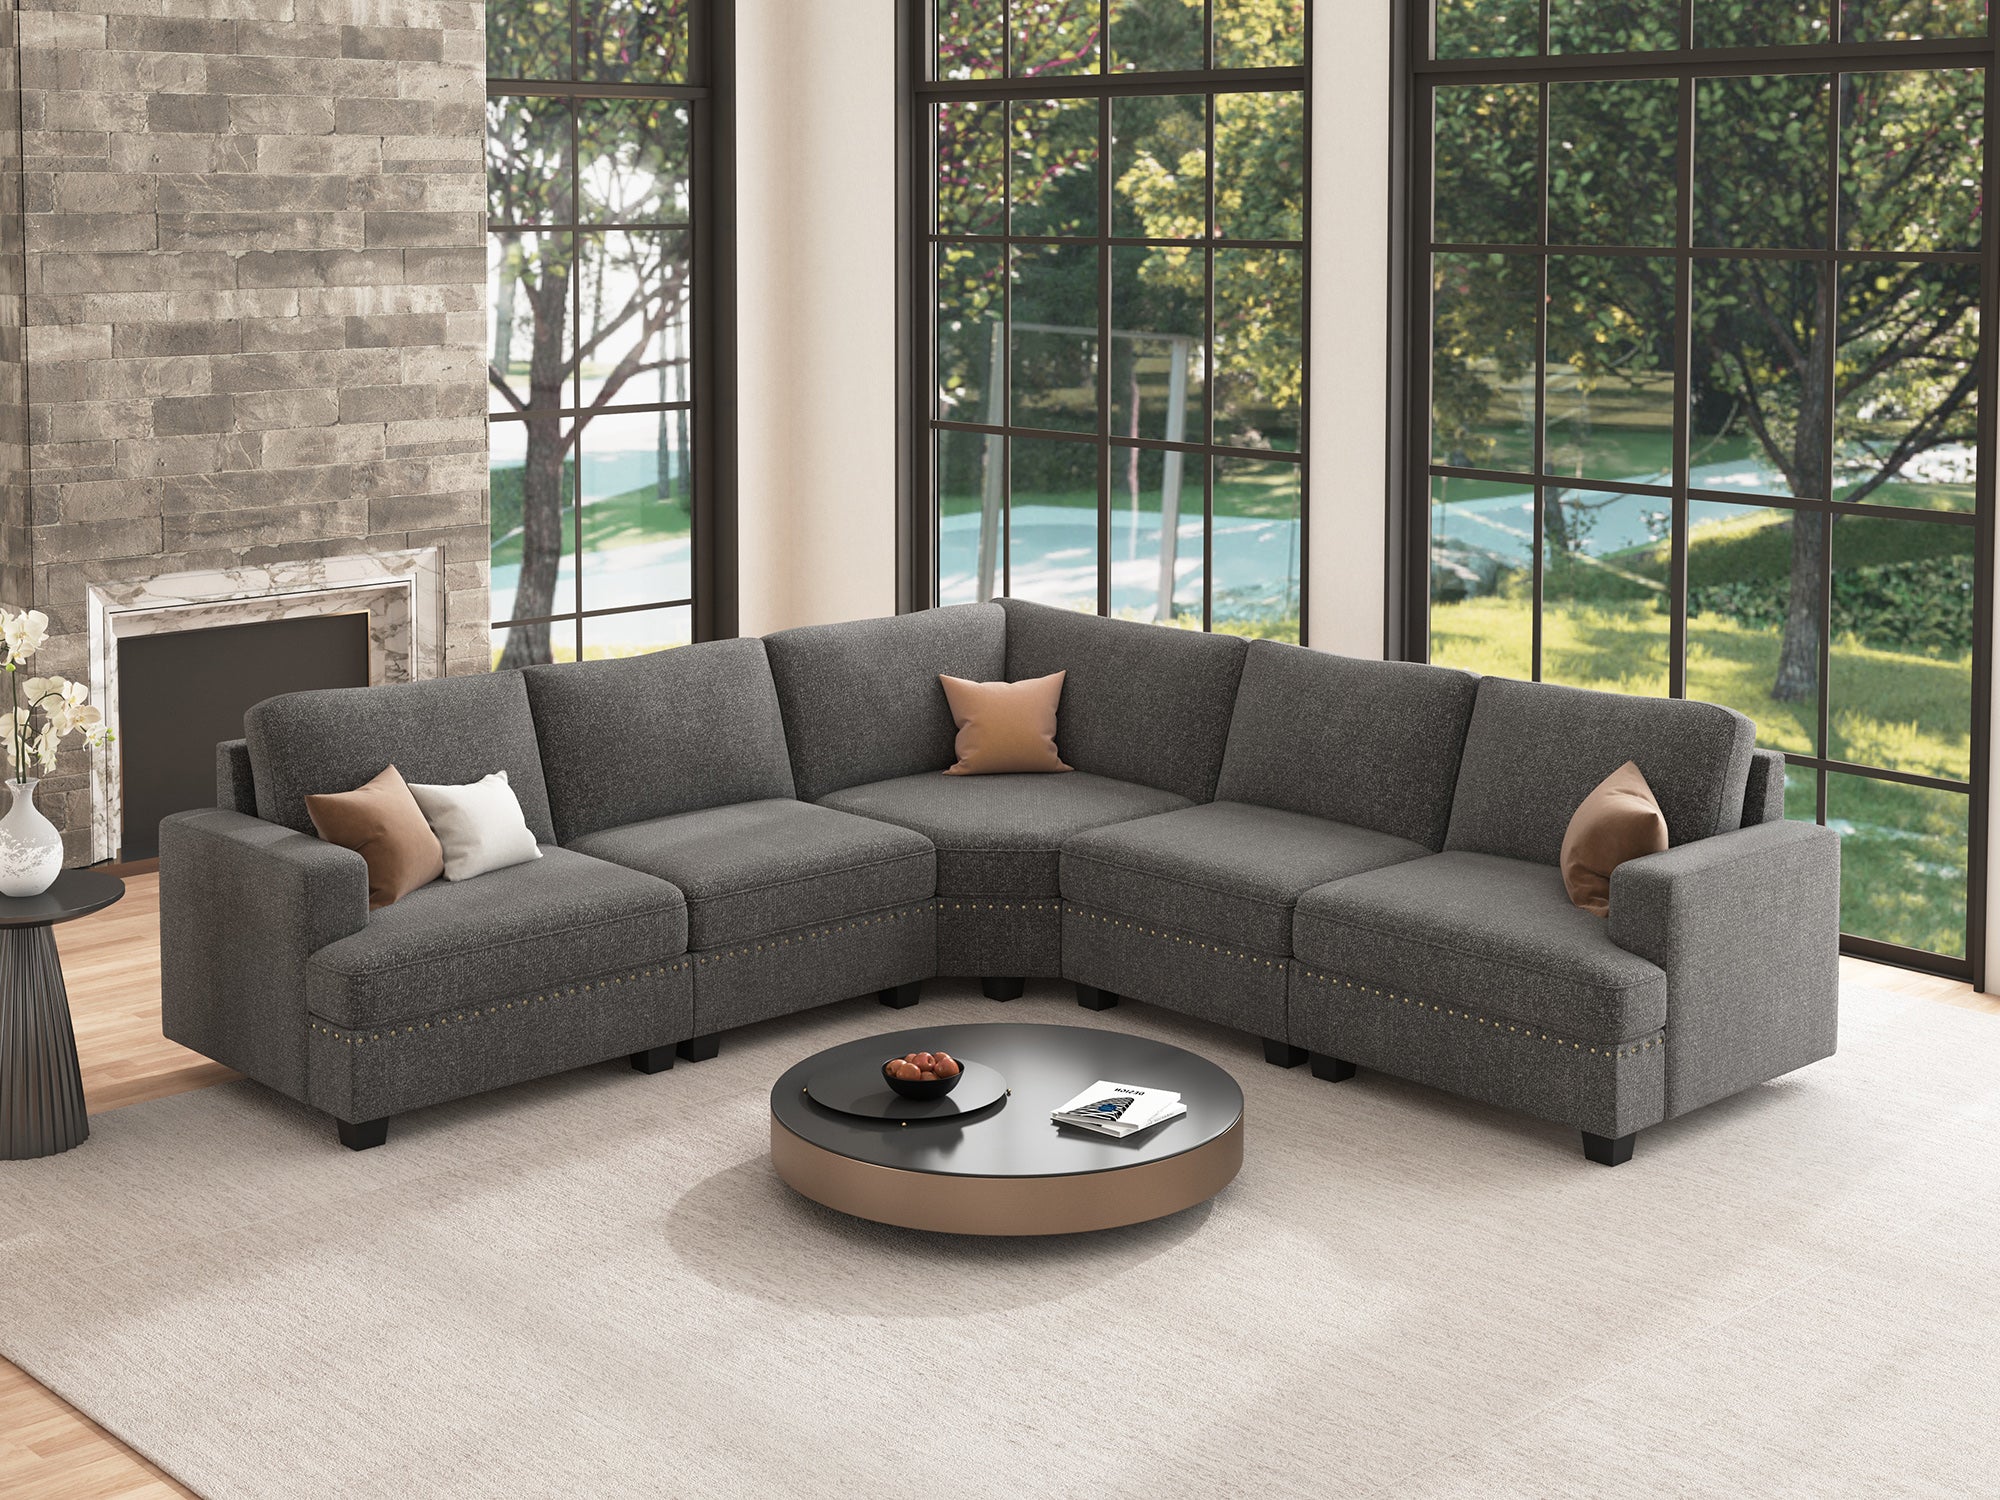 HONBAY 5-Seat Corner Modular Sofa  Oversized Convertible Sectional Sofa Couch for Living Room #Color_Light Grey